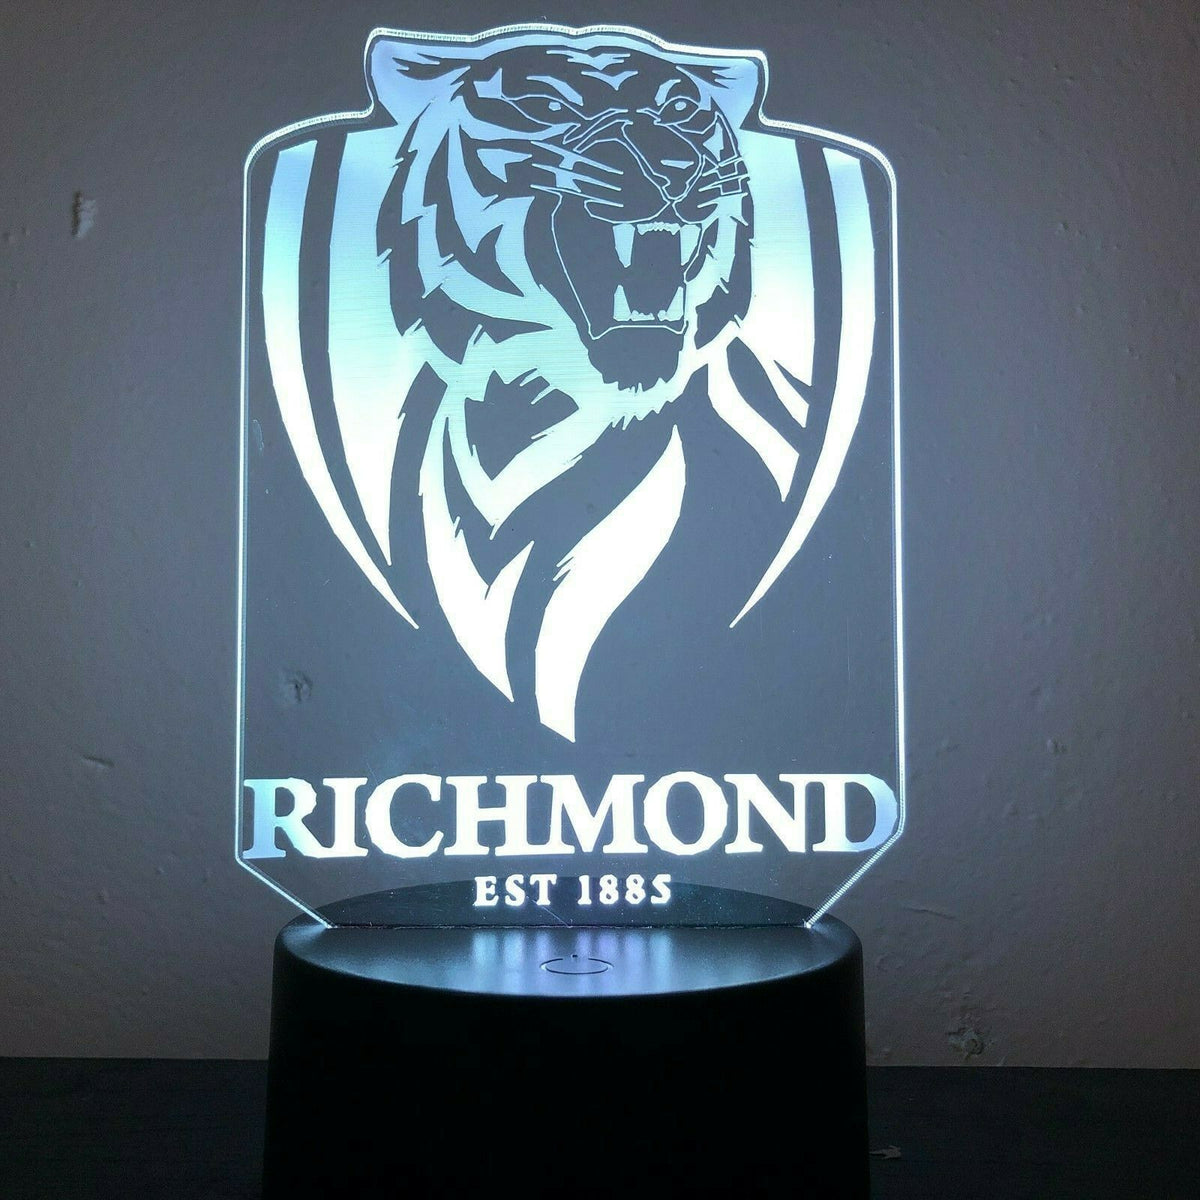 RICHMOND FOOTBALL CLUB TIGERS 3D LED 7 Color Night Light remote Table Lamp AFL.